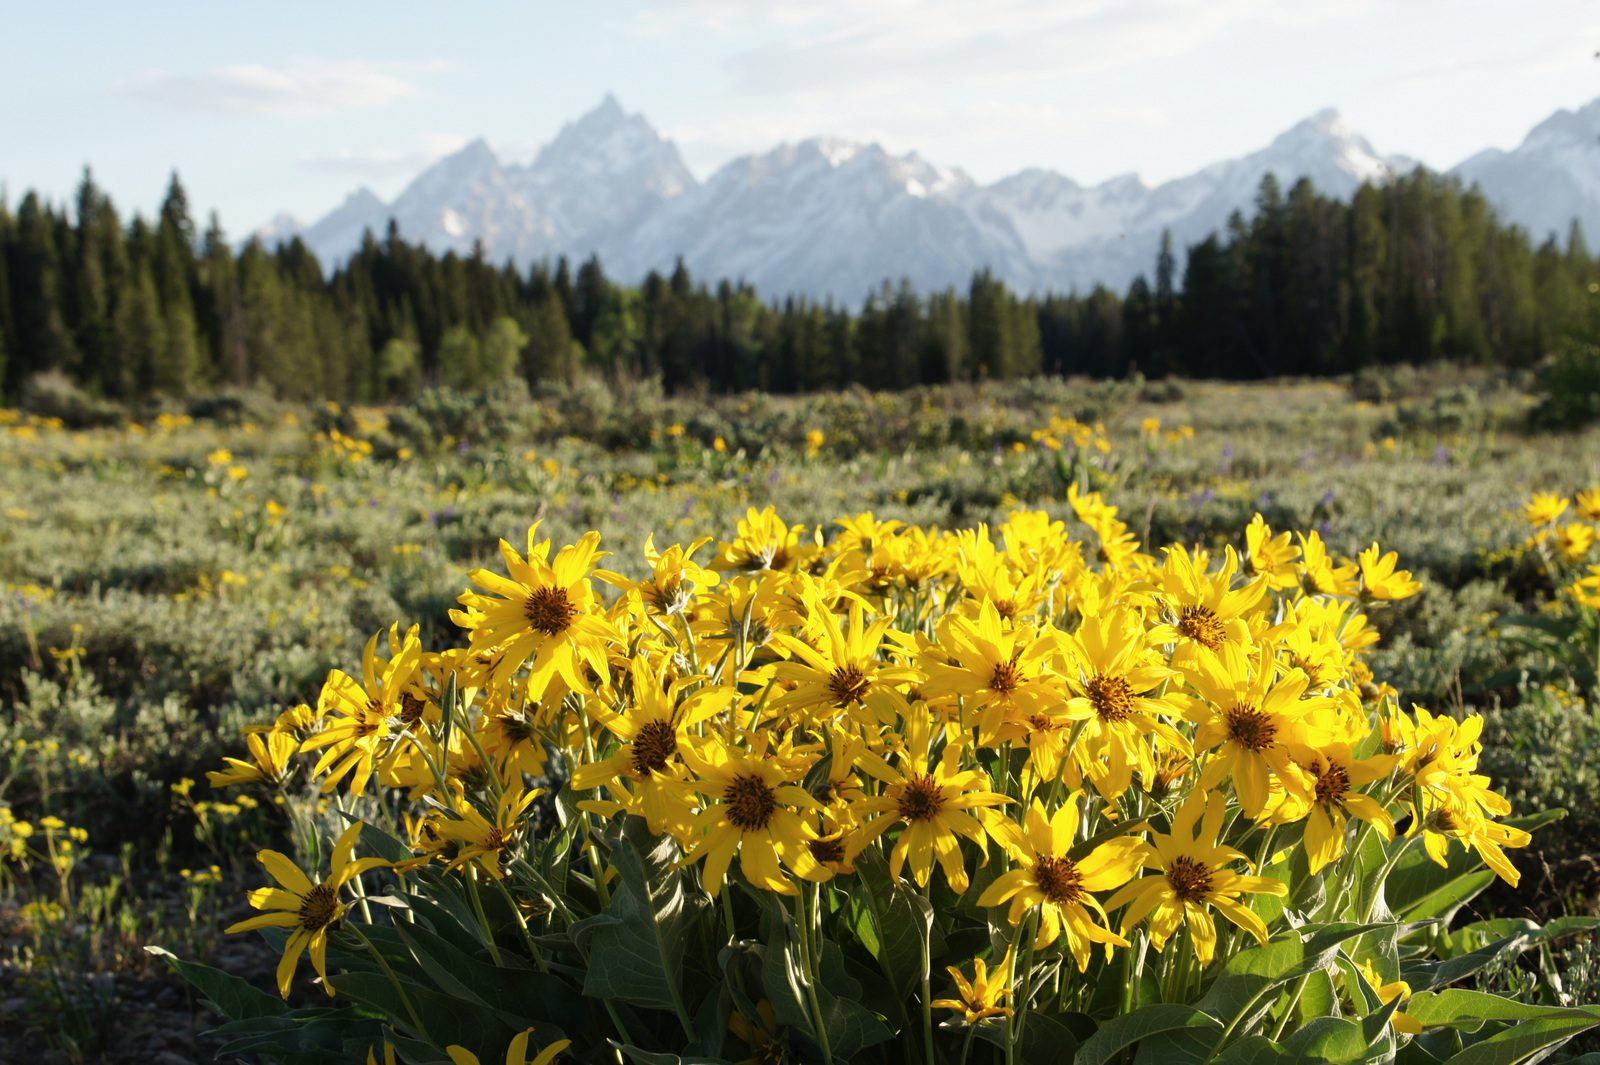 I know, I know, you've seen it...but it's just so pretty with flowers and mountains! (Grand Teton)